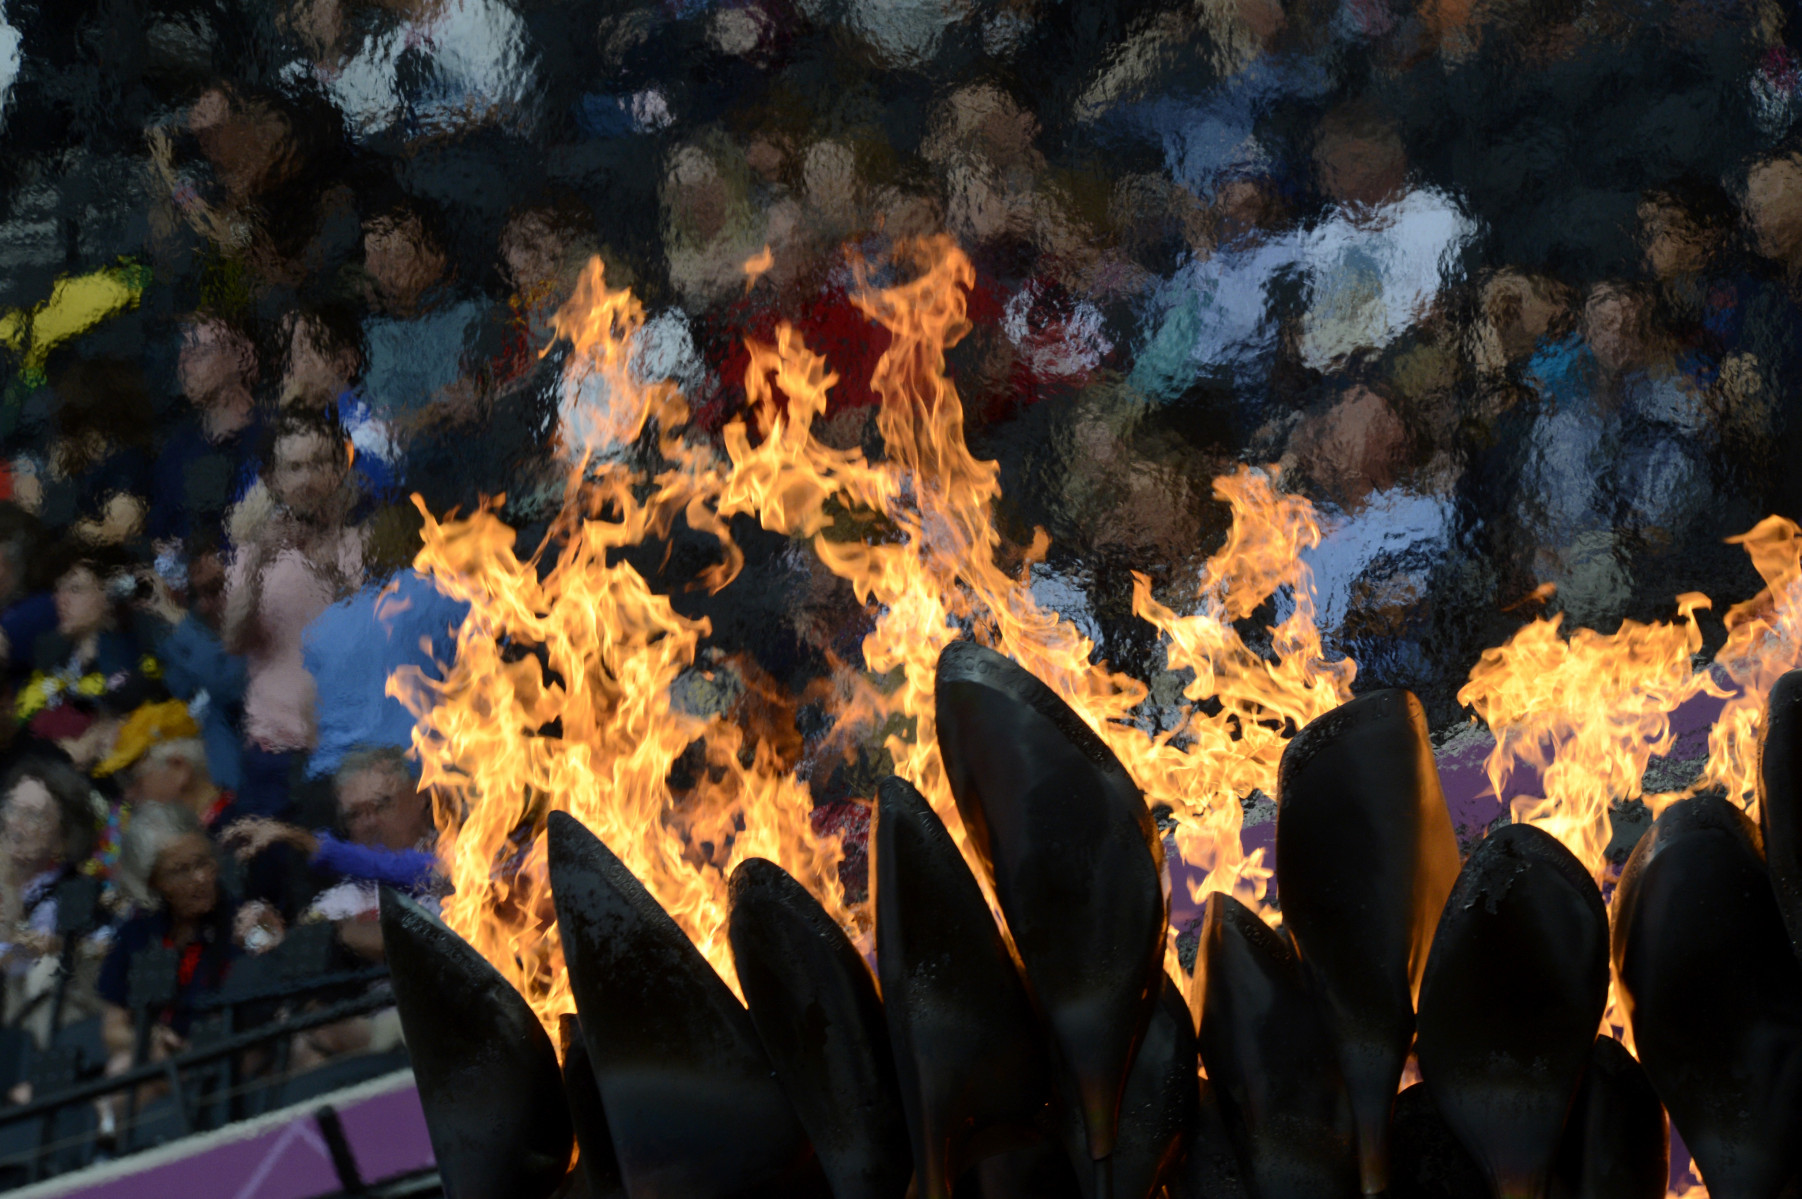 The Olympic flame with spectators at the Olympic Stadium in the background during the London Olympics  : Olympics : Photography by Adam Stoltman: Sports Photography, The Arts, Portraiture, Travel, Photojournalism and Fine Art in New York